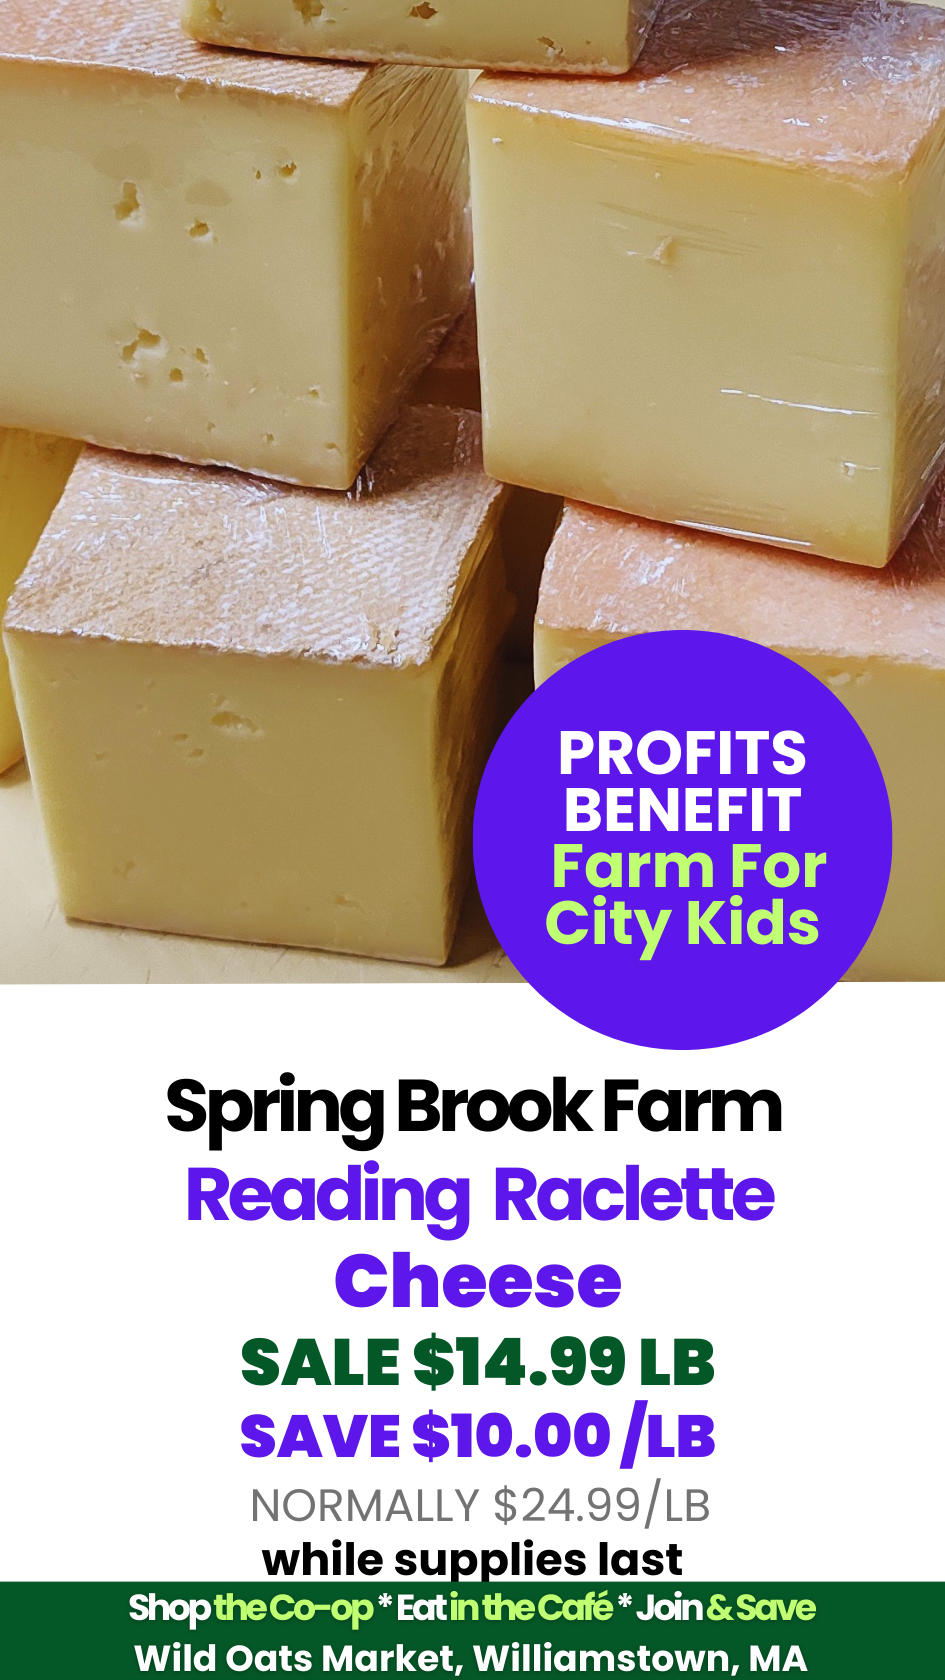 Wild Oats Market Weekly Update APR 28 to MAY SPRING BROOK FARM READING RACLETTE CHEESE.png